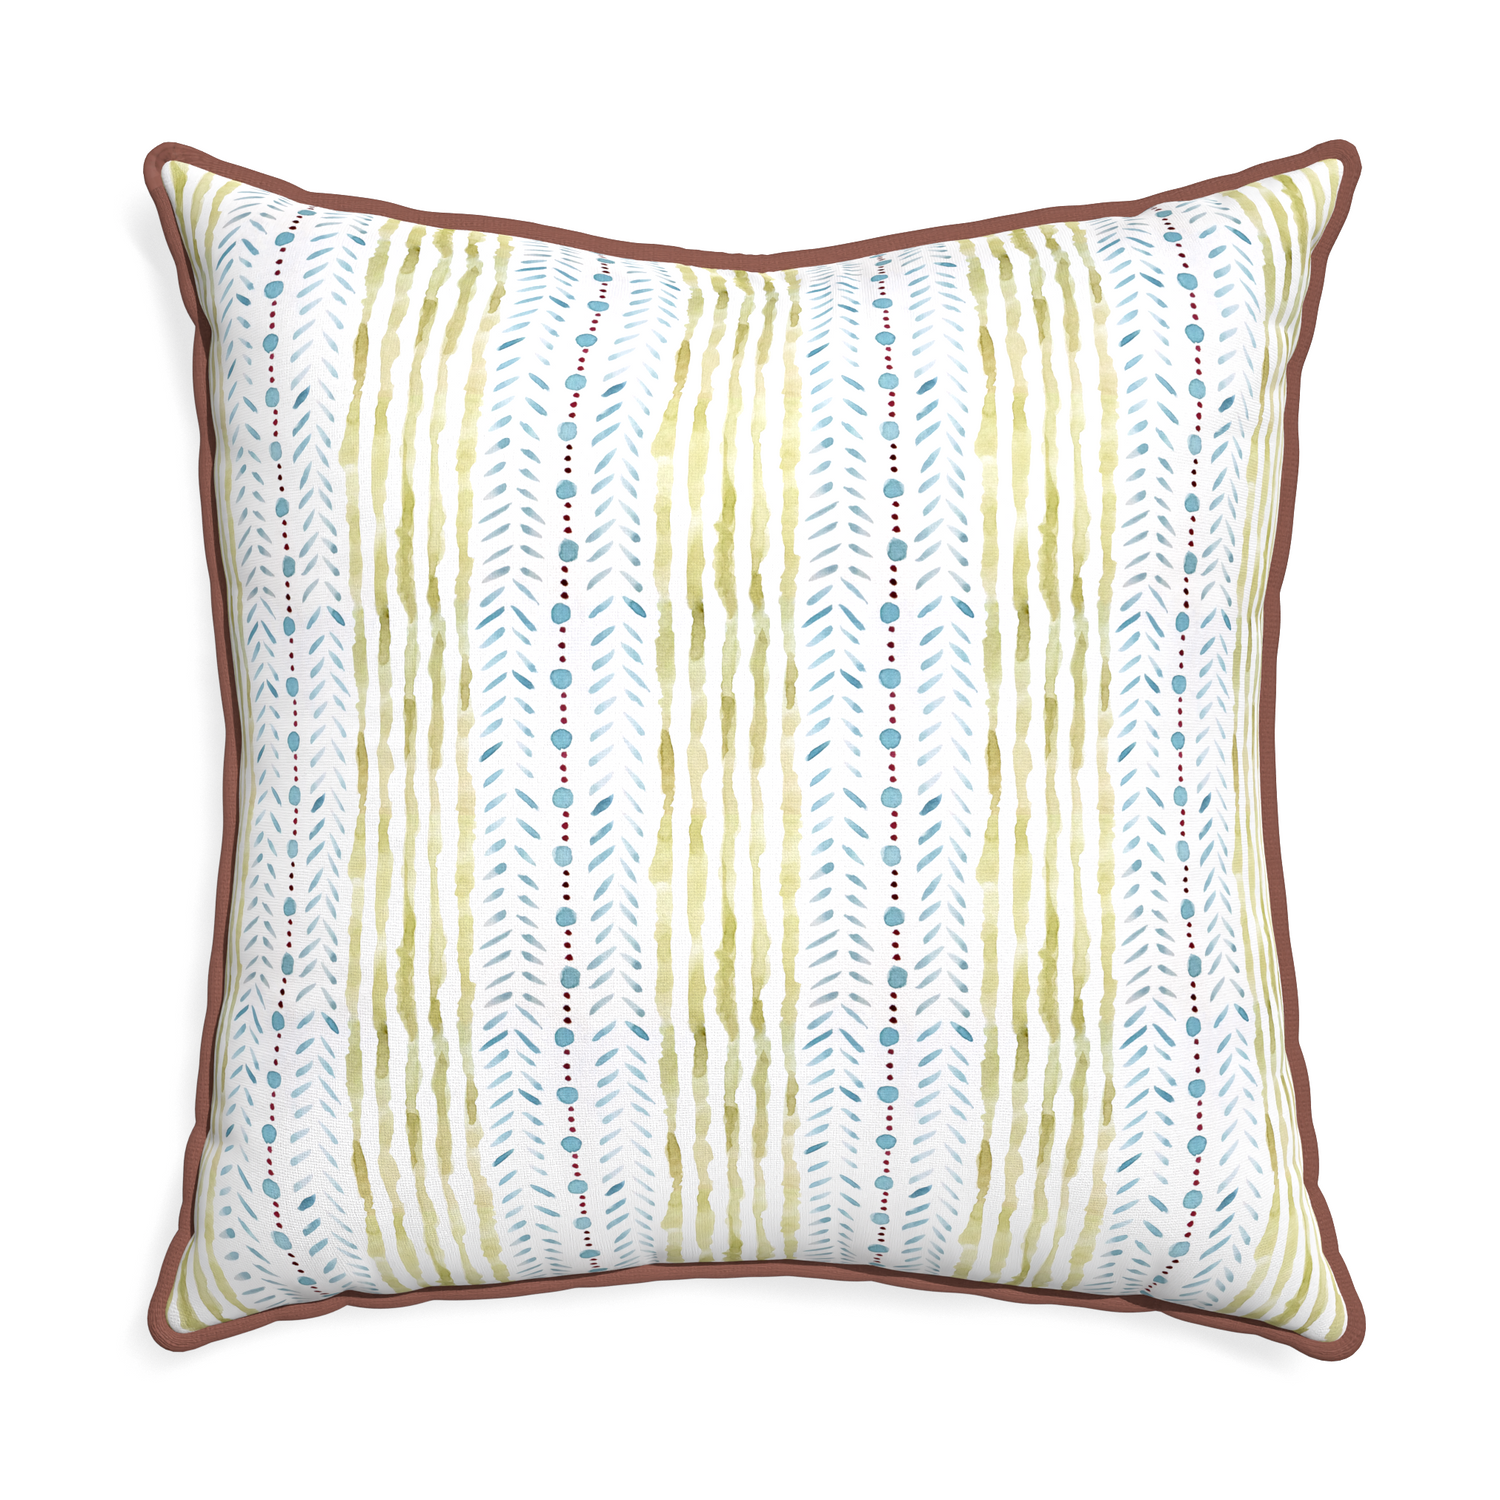 Euro-sham julia custom blue & green stripedpillow with w piping on white background